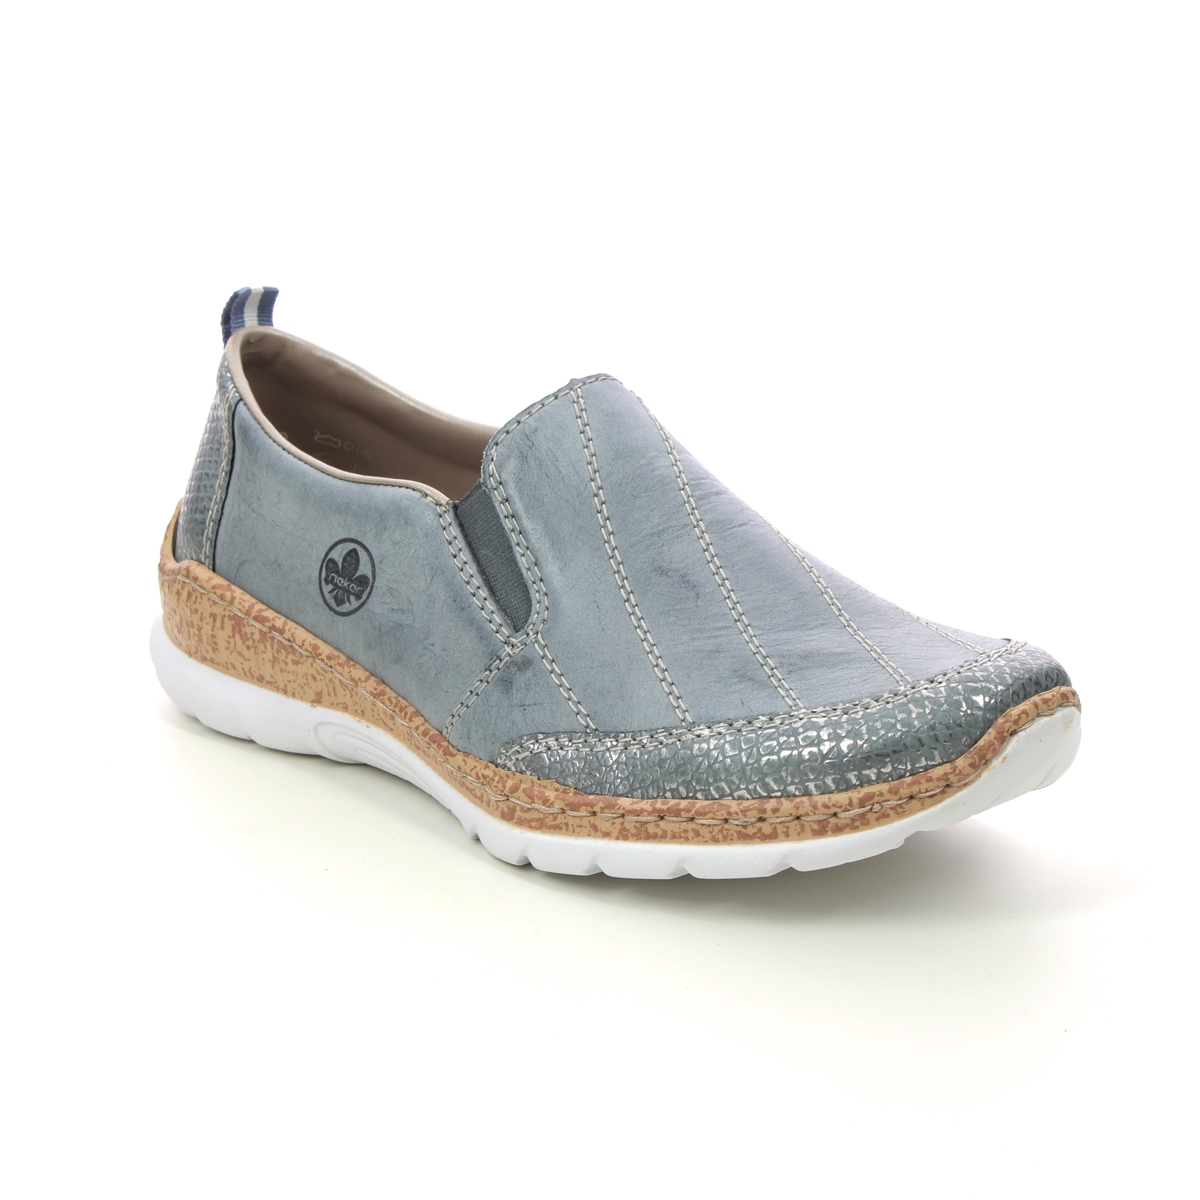 Rieker Empilucas Denim Leather Womens Comfort Slip On Shoes N4274-12 In Size 37 In Plain Denim Leather